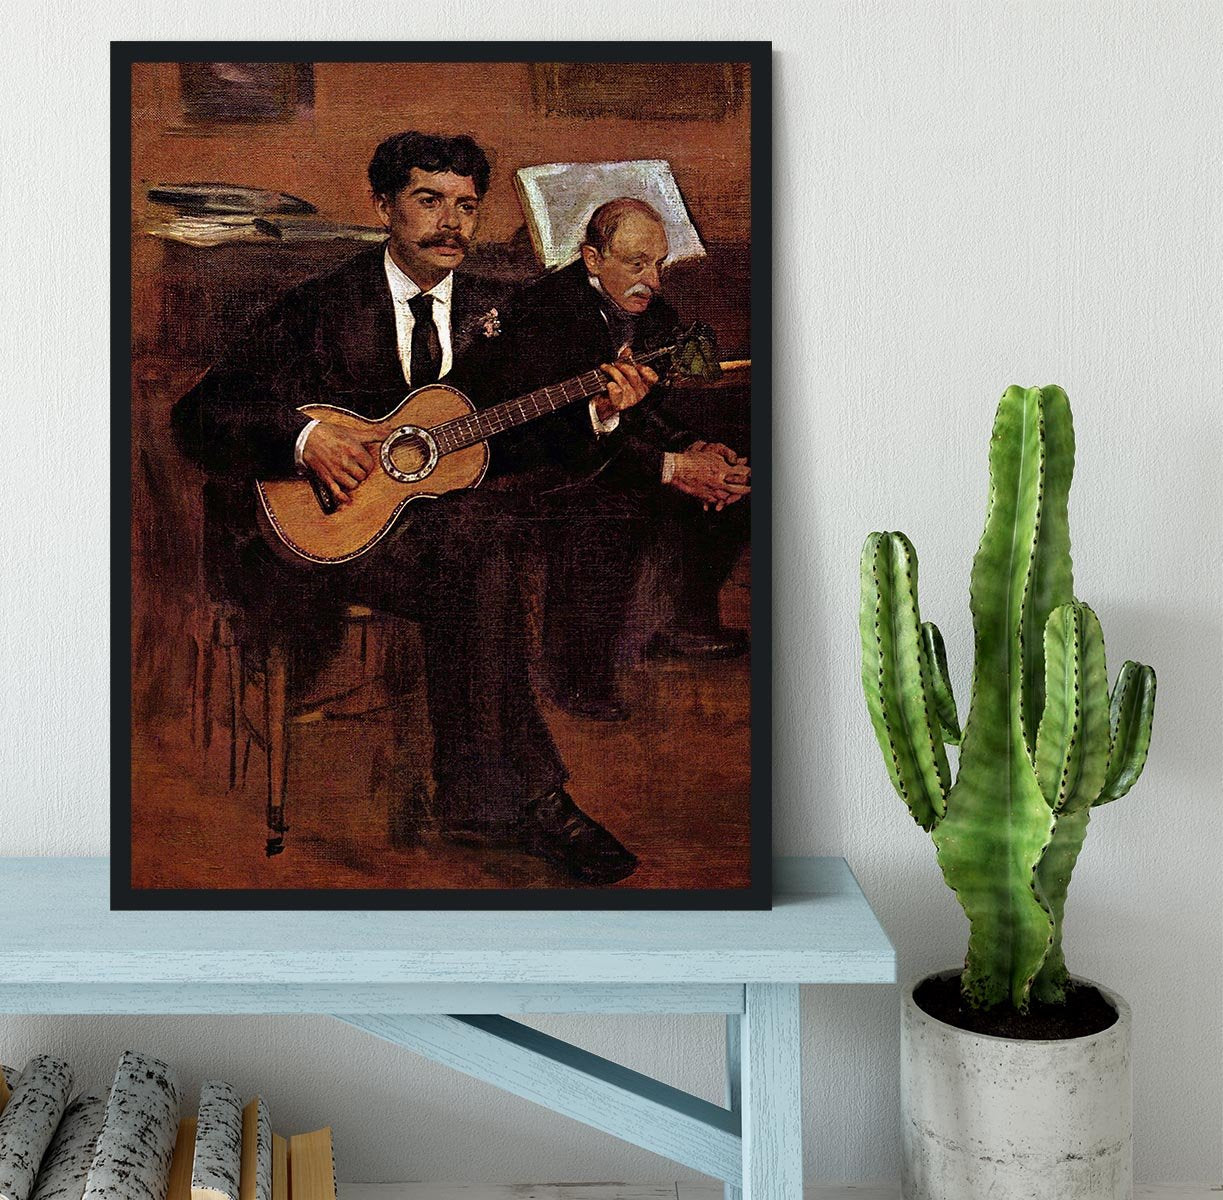 The guitarist Pagans and Monsieur Degas by Manet Framed Print - Canvas Art Rocks - 2